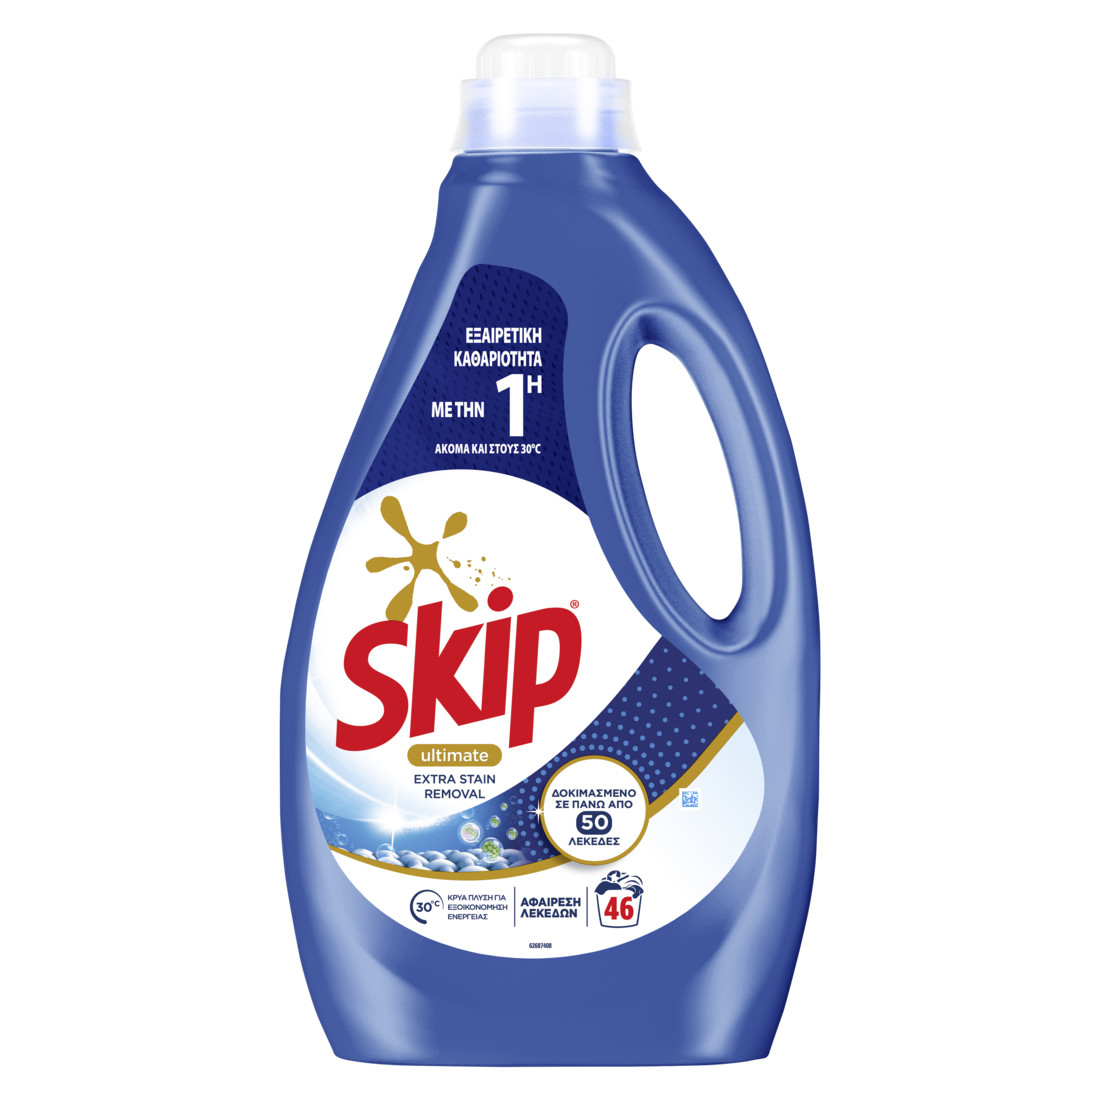 SKIP Ultimate extra stain removal packshot